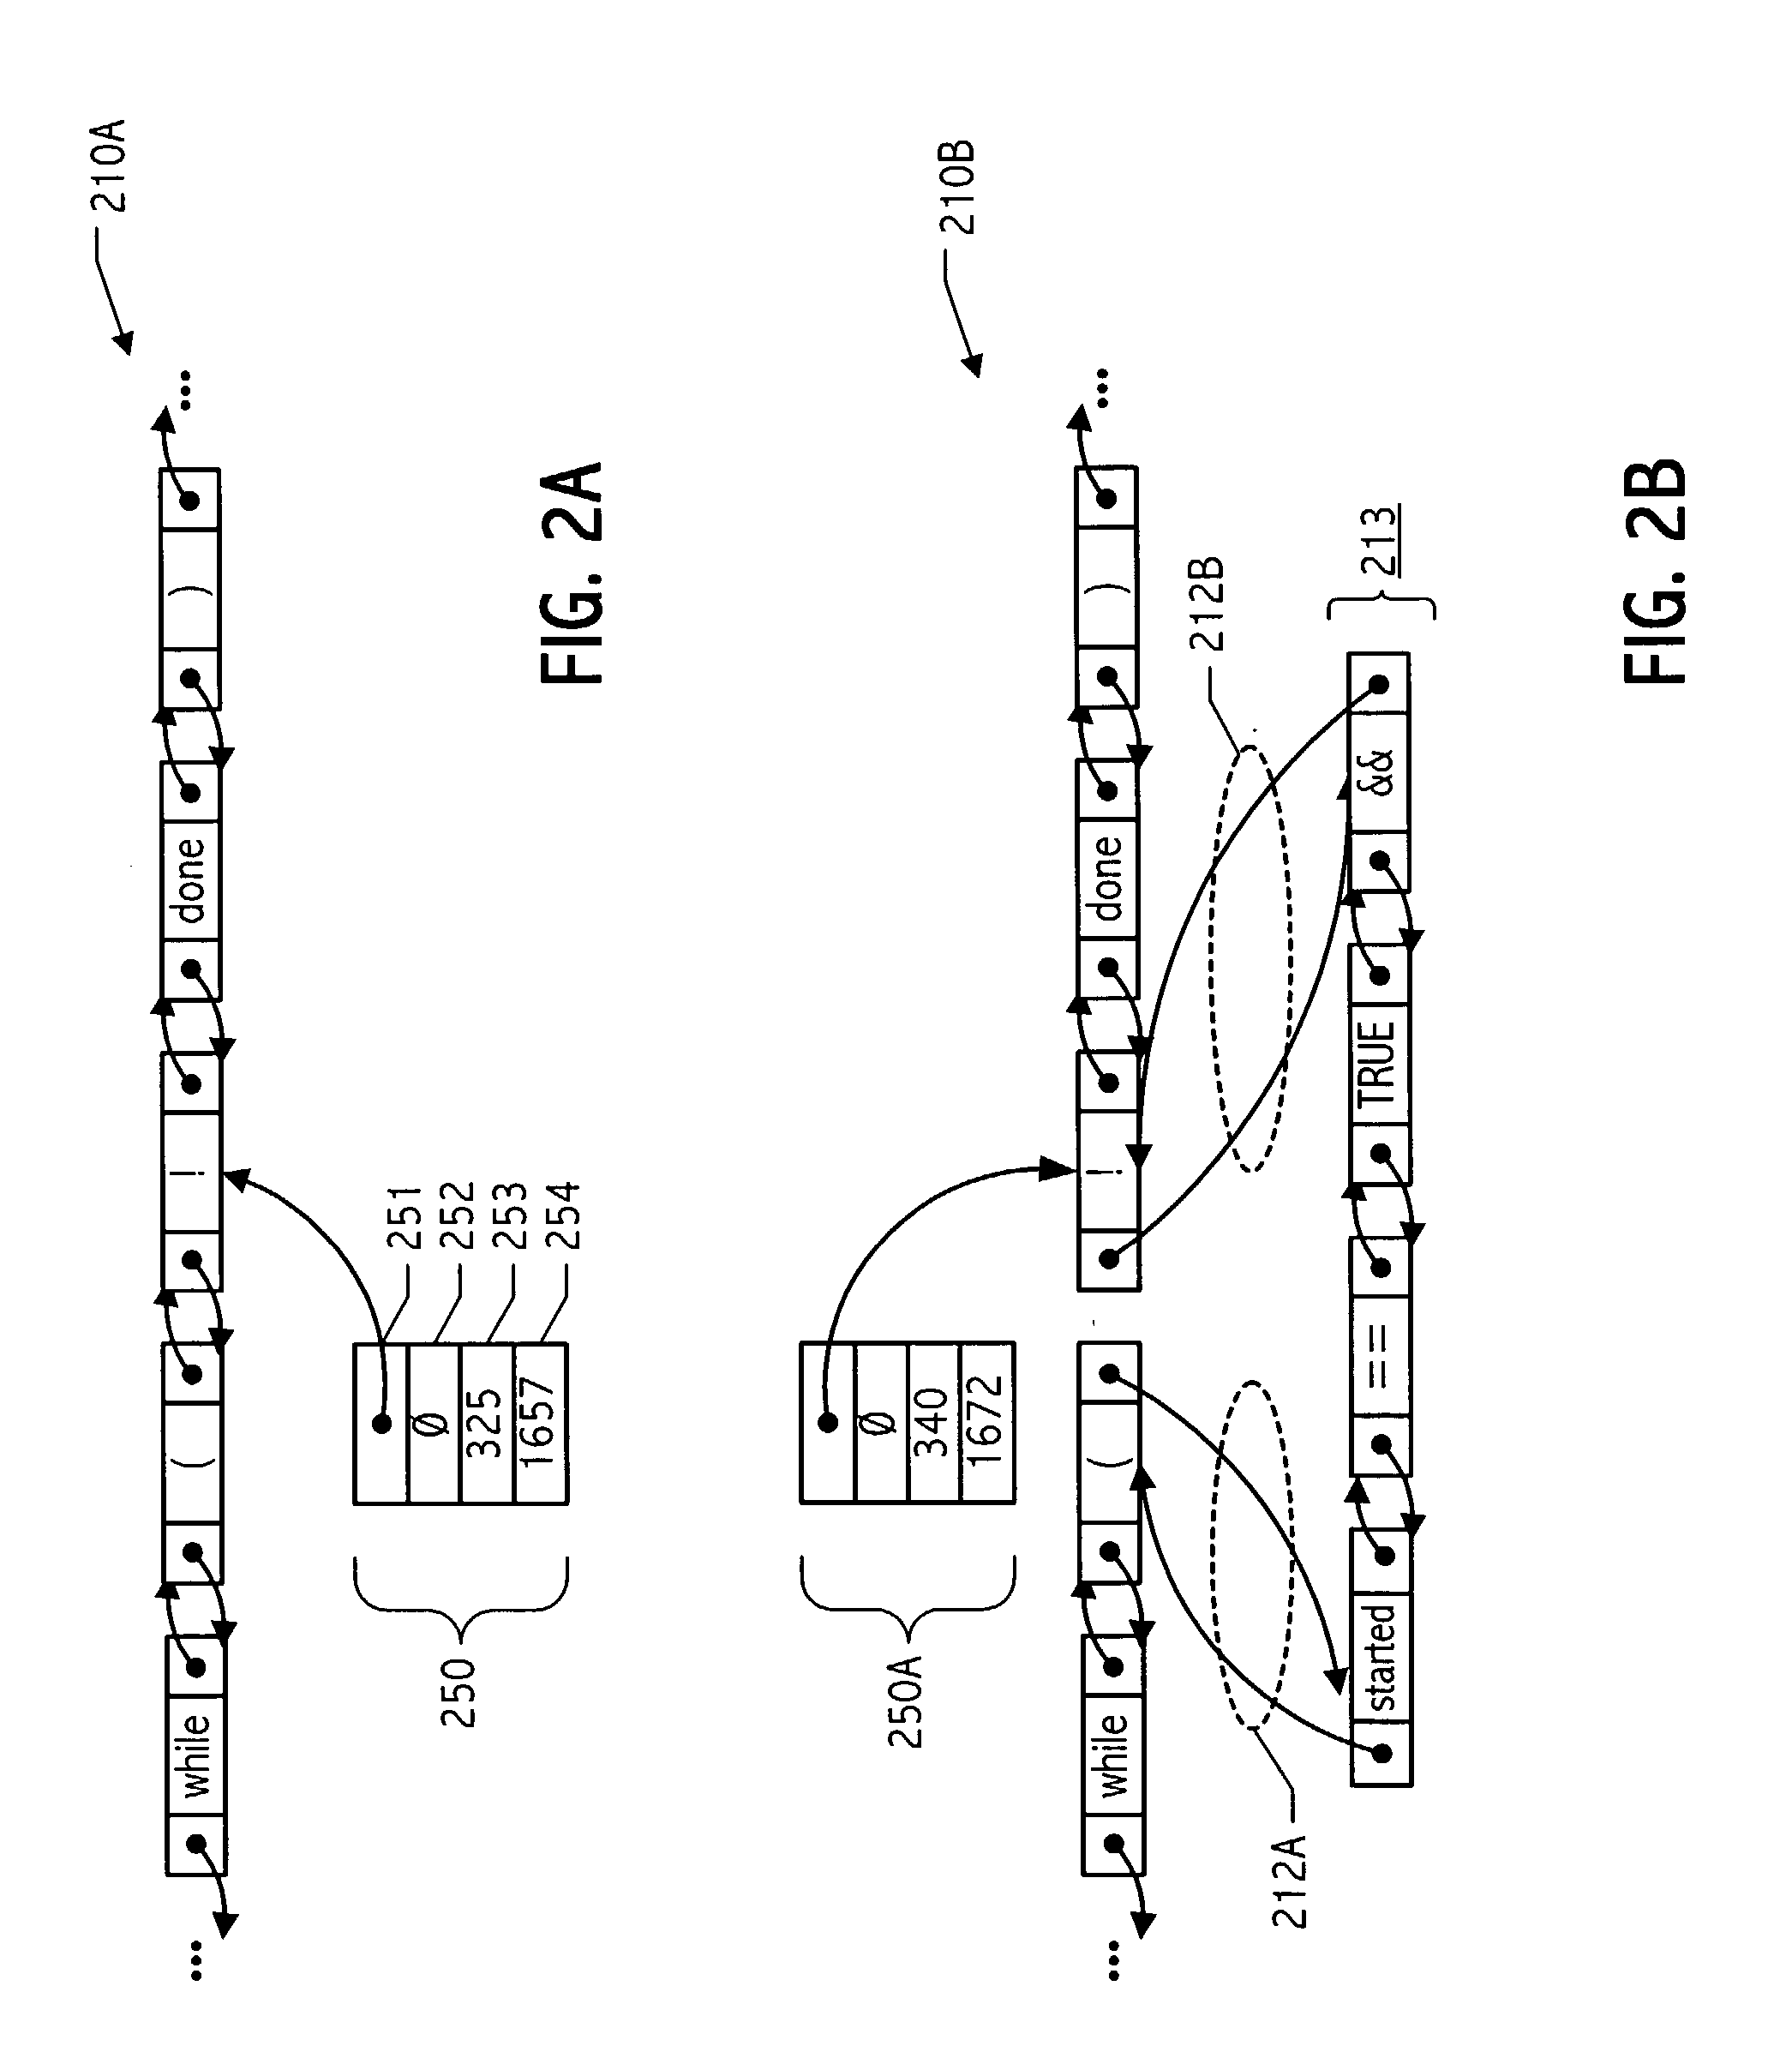 Token-oriented representation of program code with support for textual editing thereof